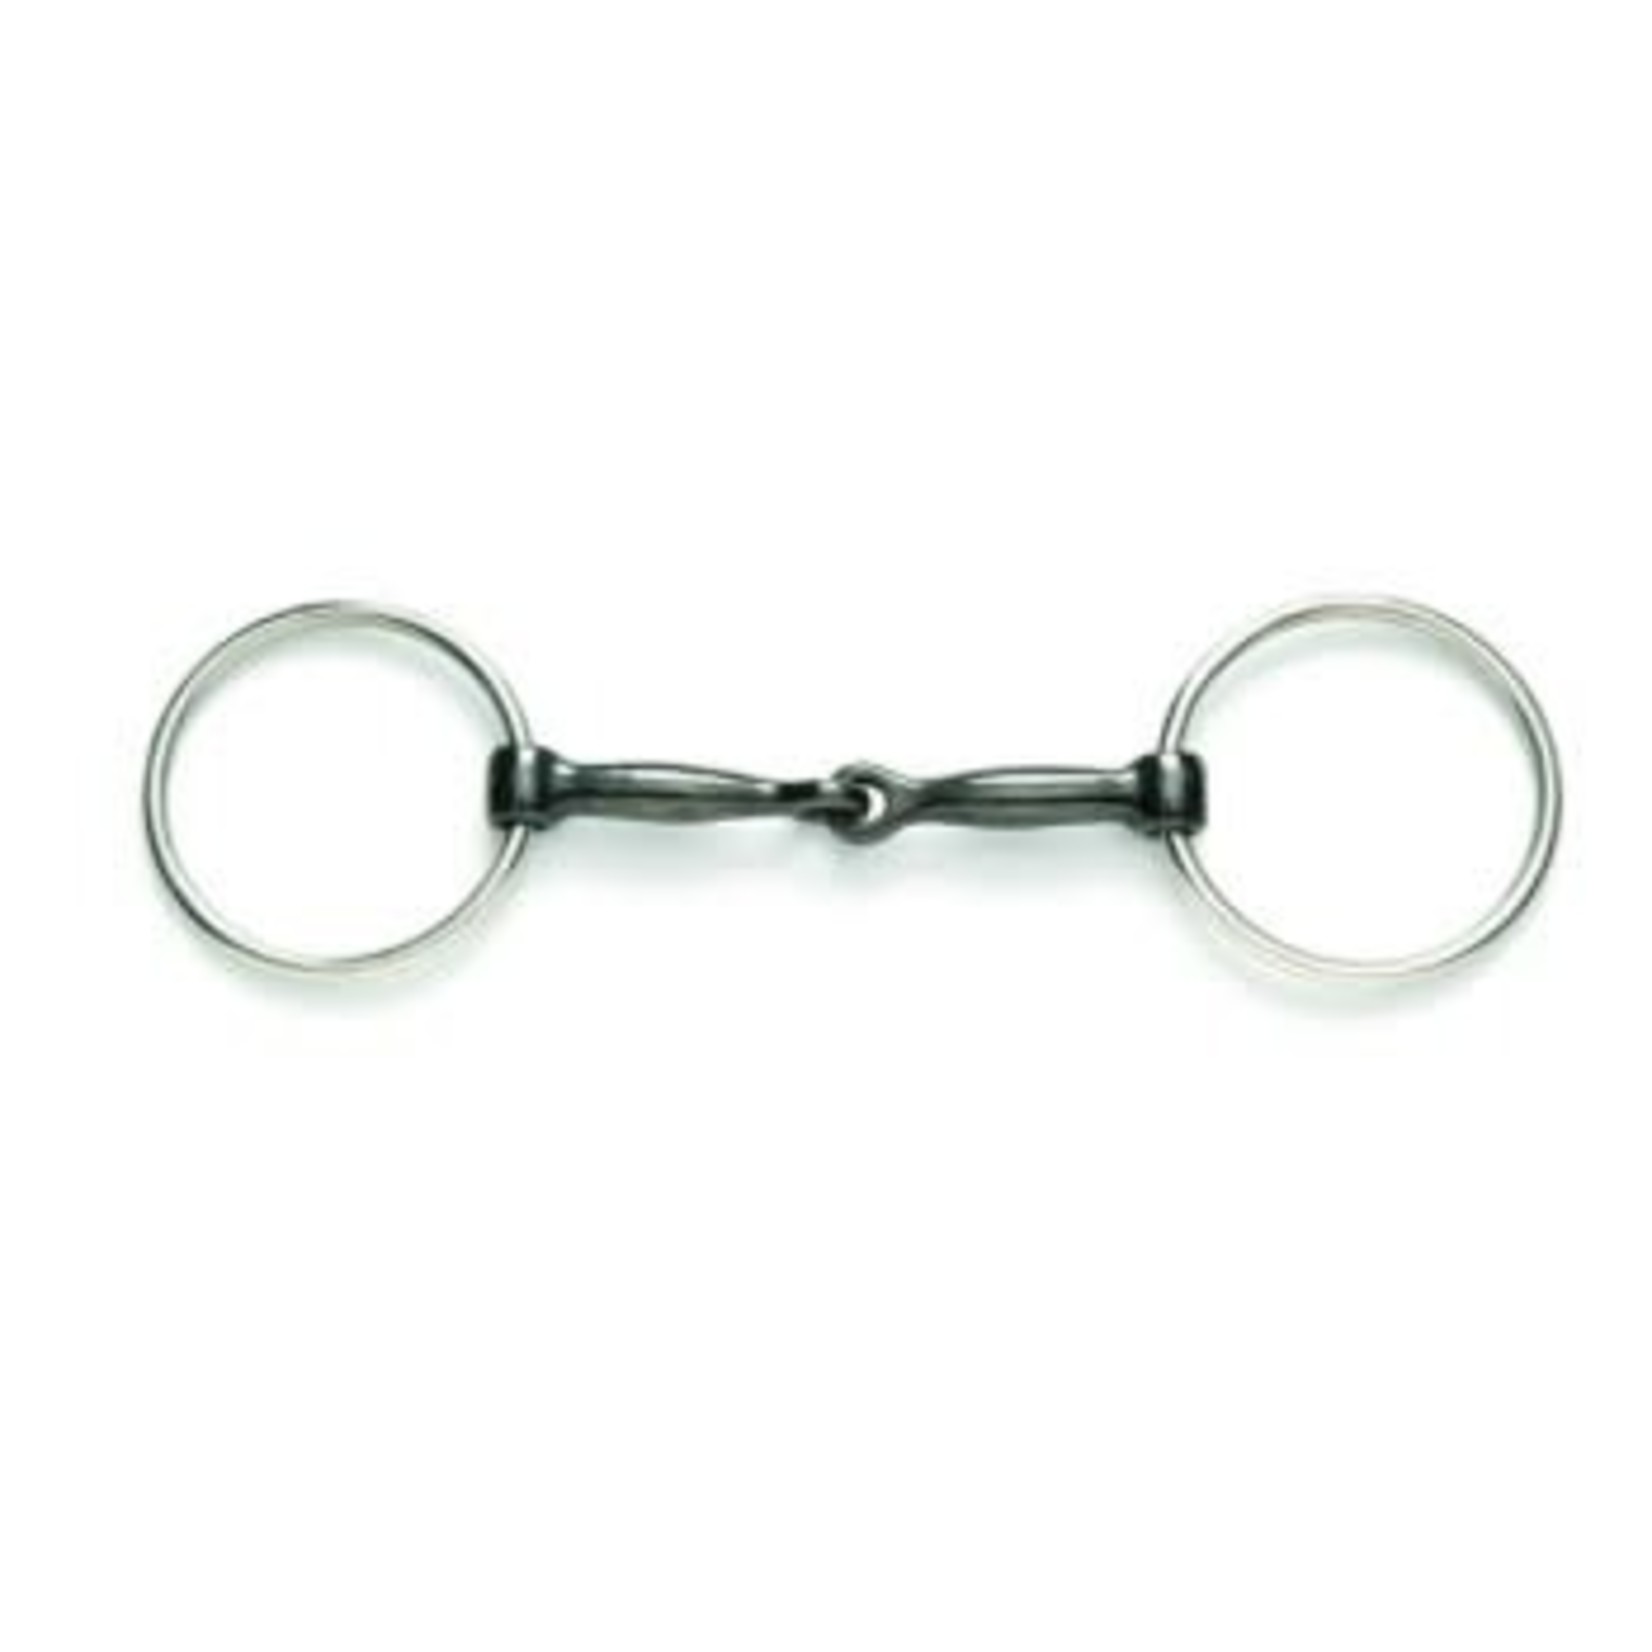 Cavalier Ring Snaffle with Sweet Iron Mouth